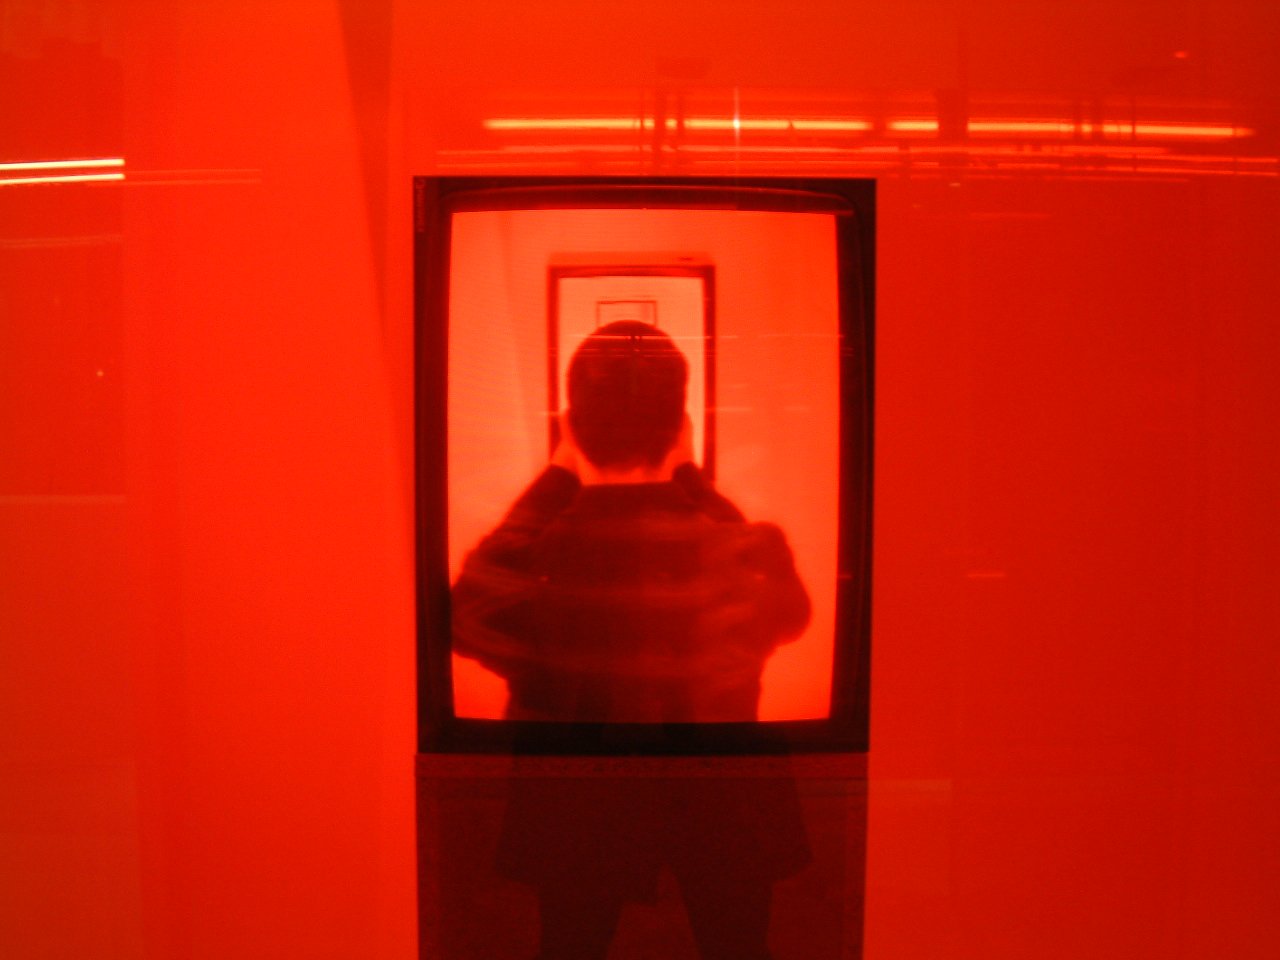 the person is watching in the mirror with the red light from underneath